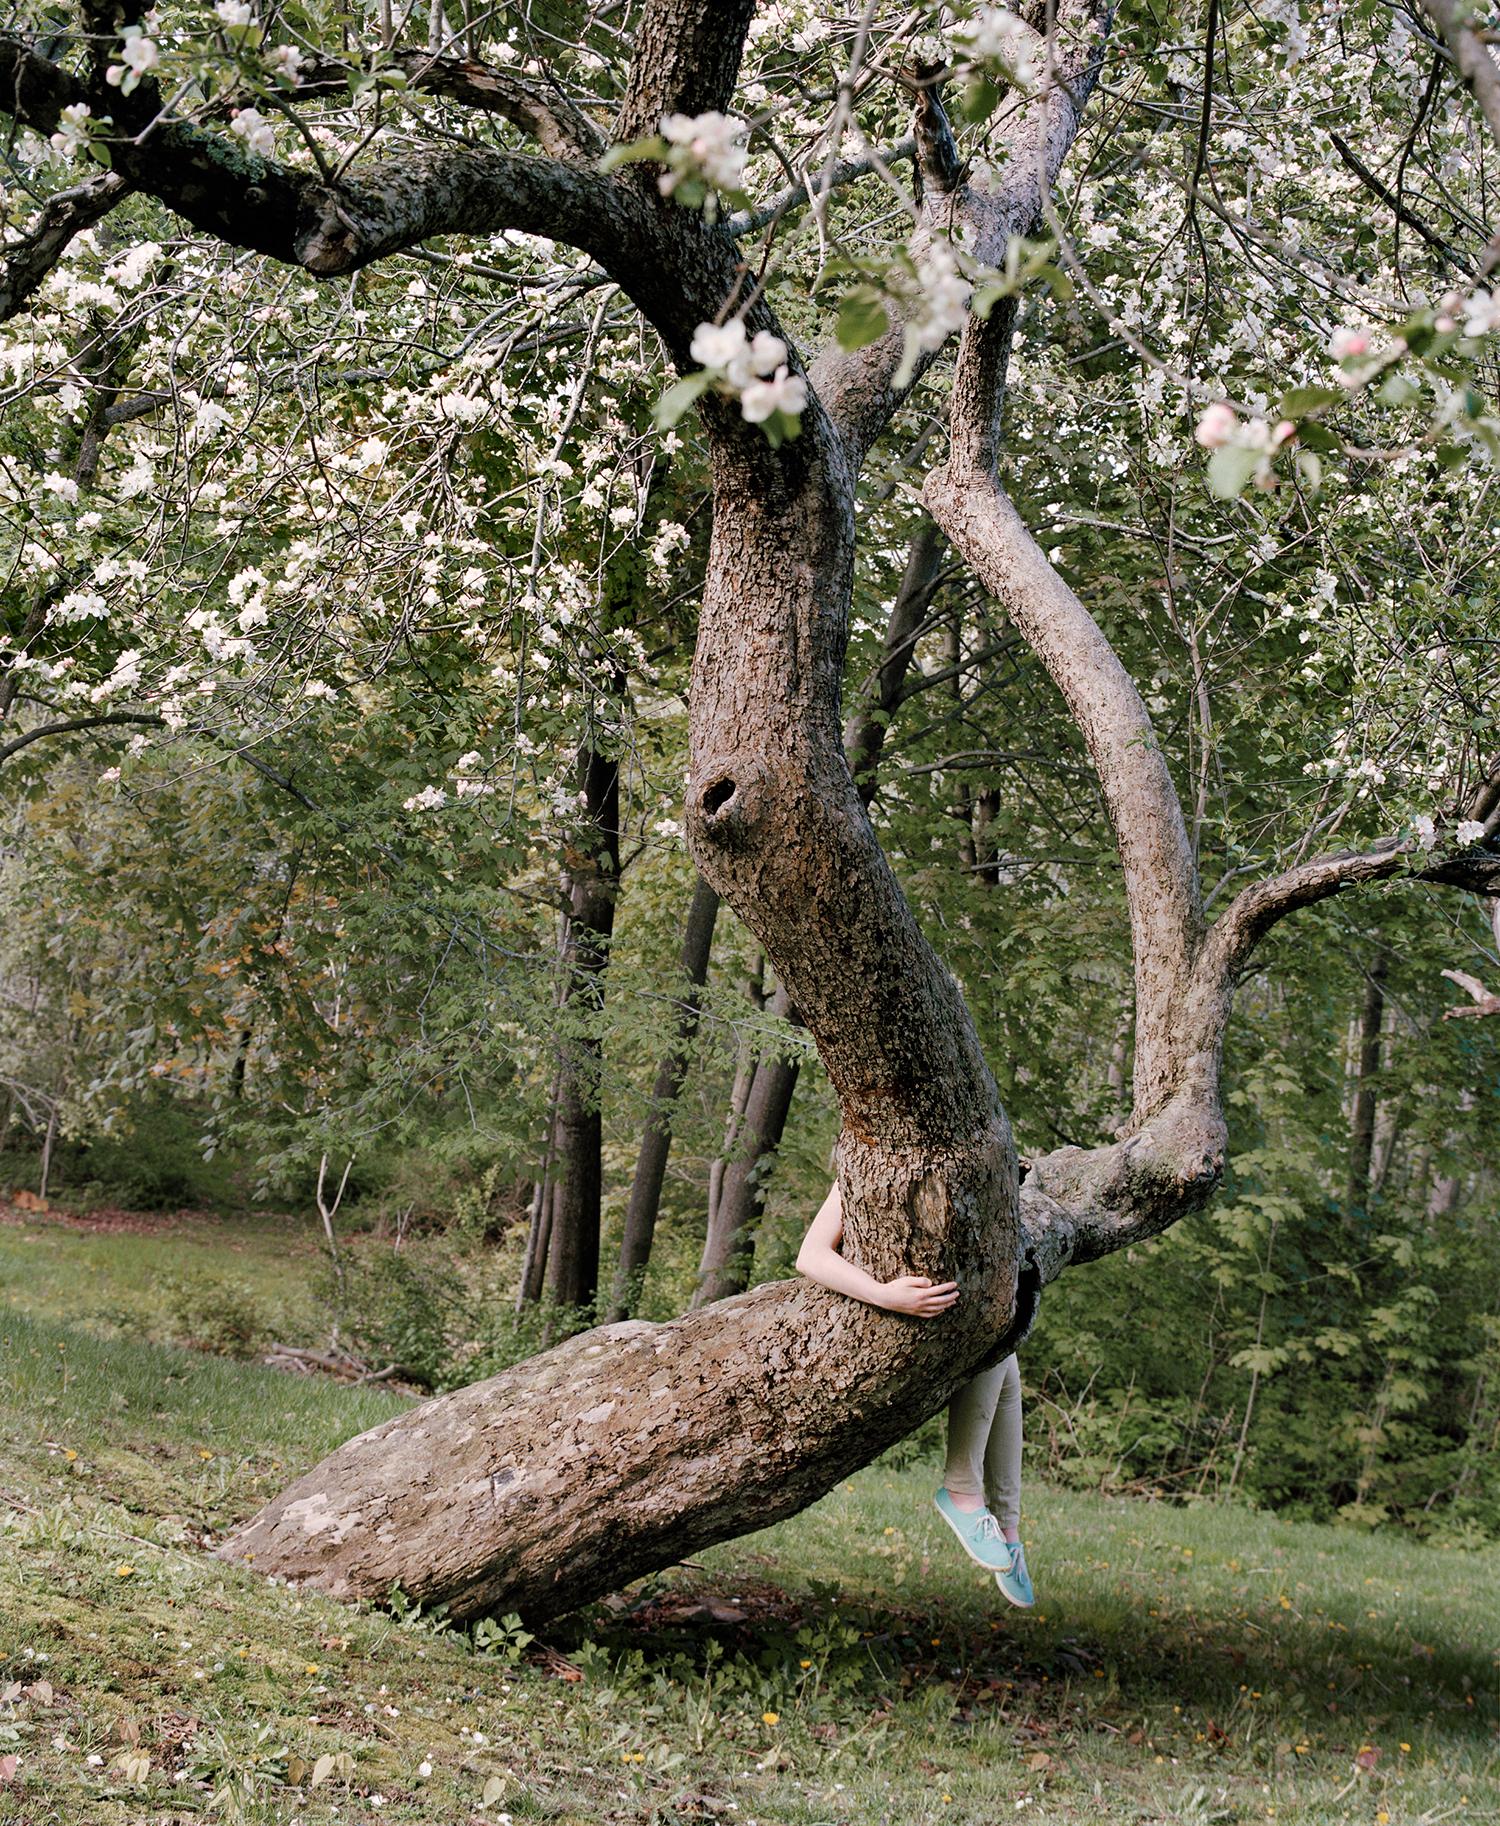 Riding the Apple Tree, 2016 - Jocelyn Lee (Colour Photography)
Signed, dated and inscribed with title on reverse
Archival pigment print

Available in two sizes:
15 x 19 inches - edition of 5
23 x 28 inches - edition of 5

Throughout her career,